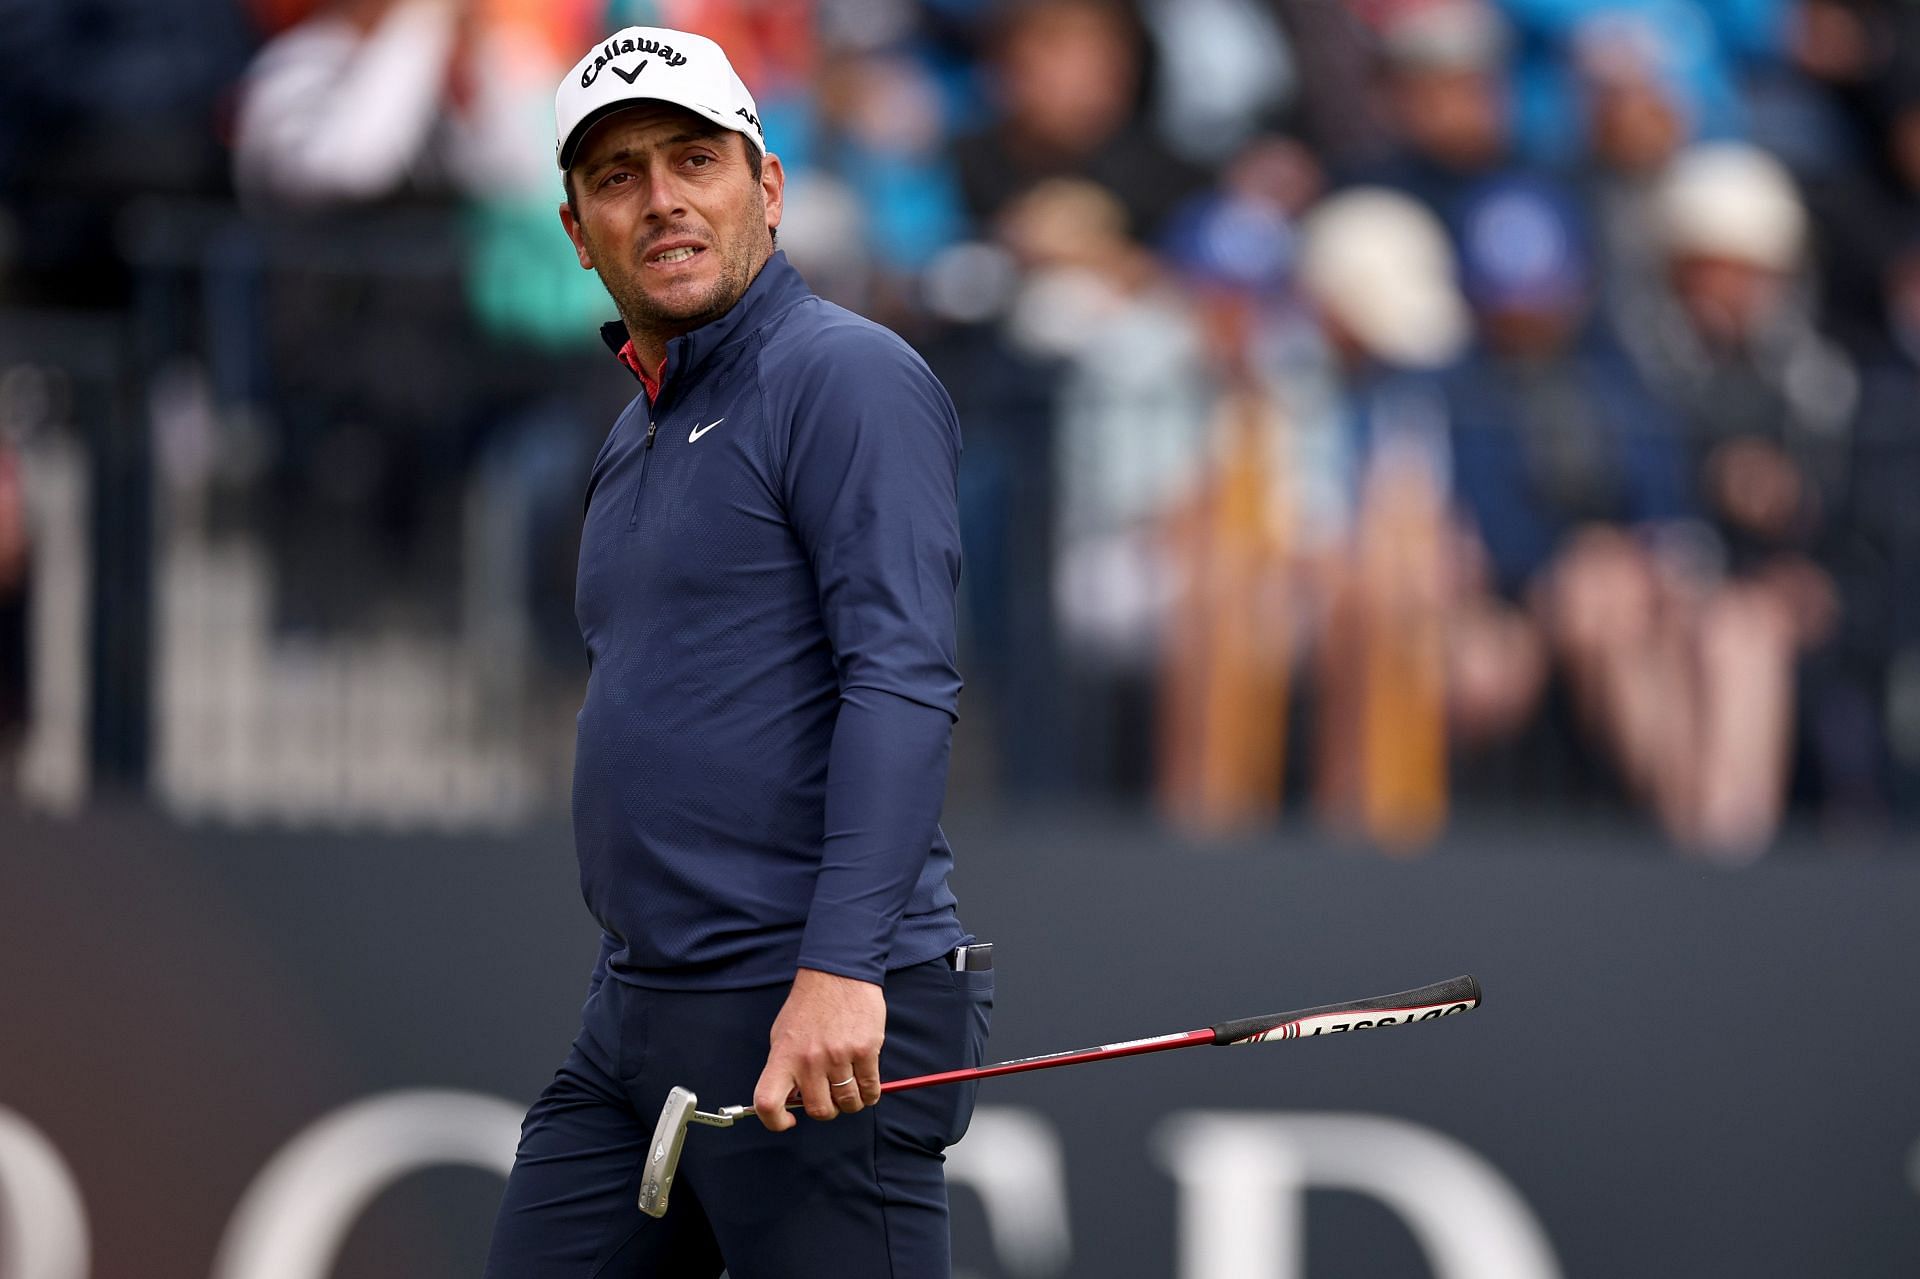 Francesco Molinari Joins His Brother Edoardo As Europes Ryder Cup Vice Captain For The 5th Team 